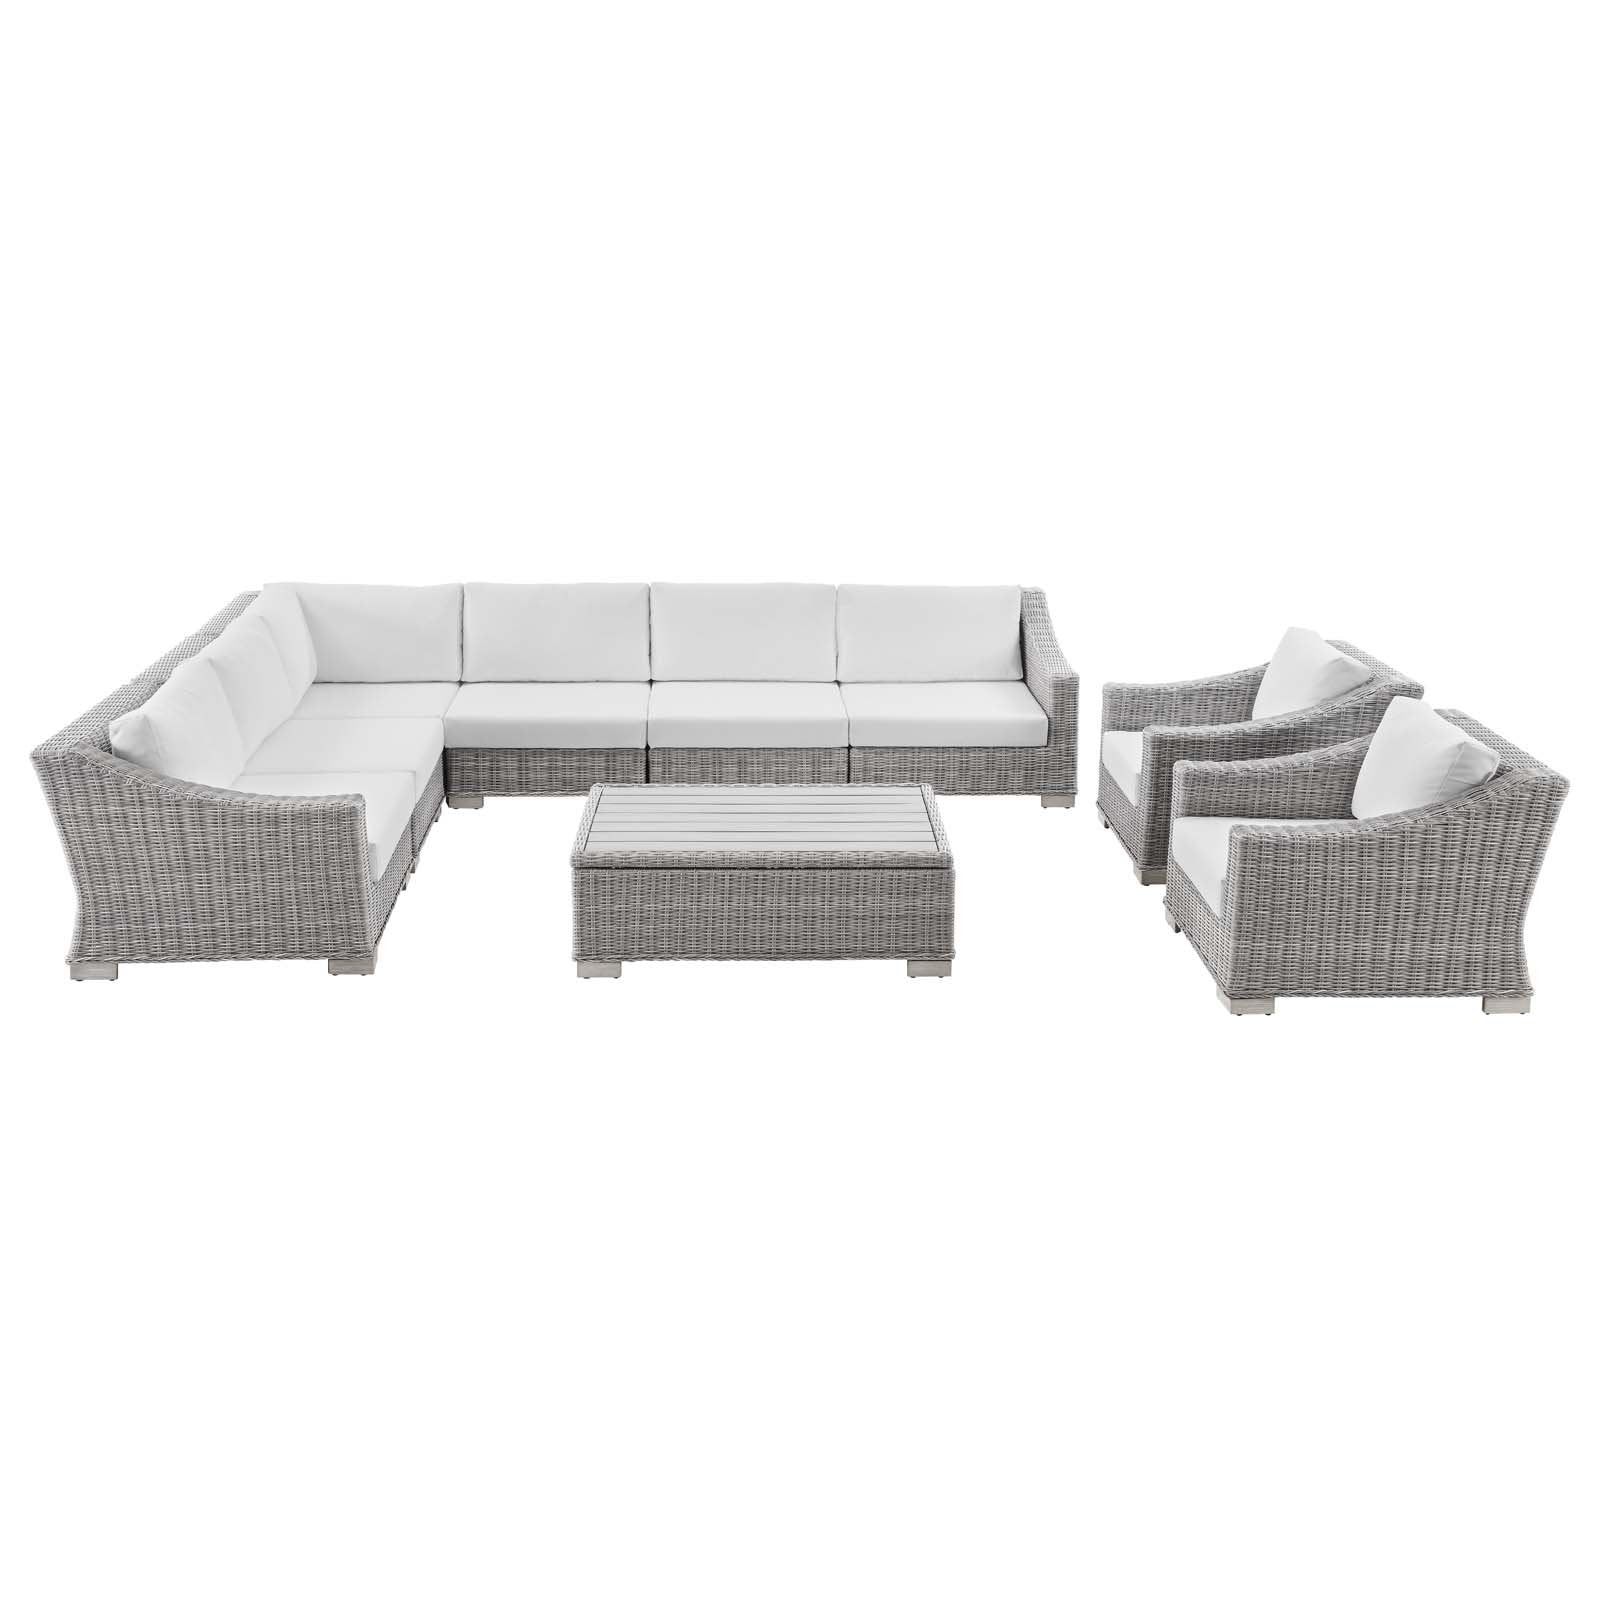 Conway Outdoor Patio Wicker Rattan 9-Piece Sectional Sofa Furniture Set